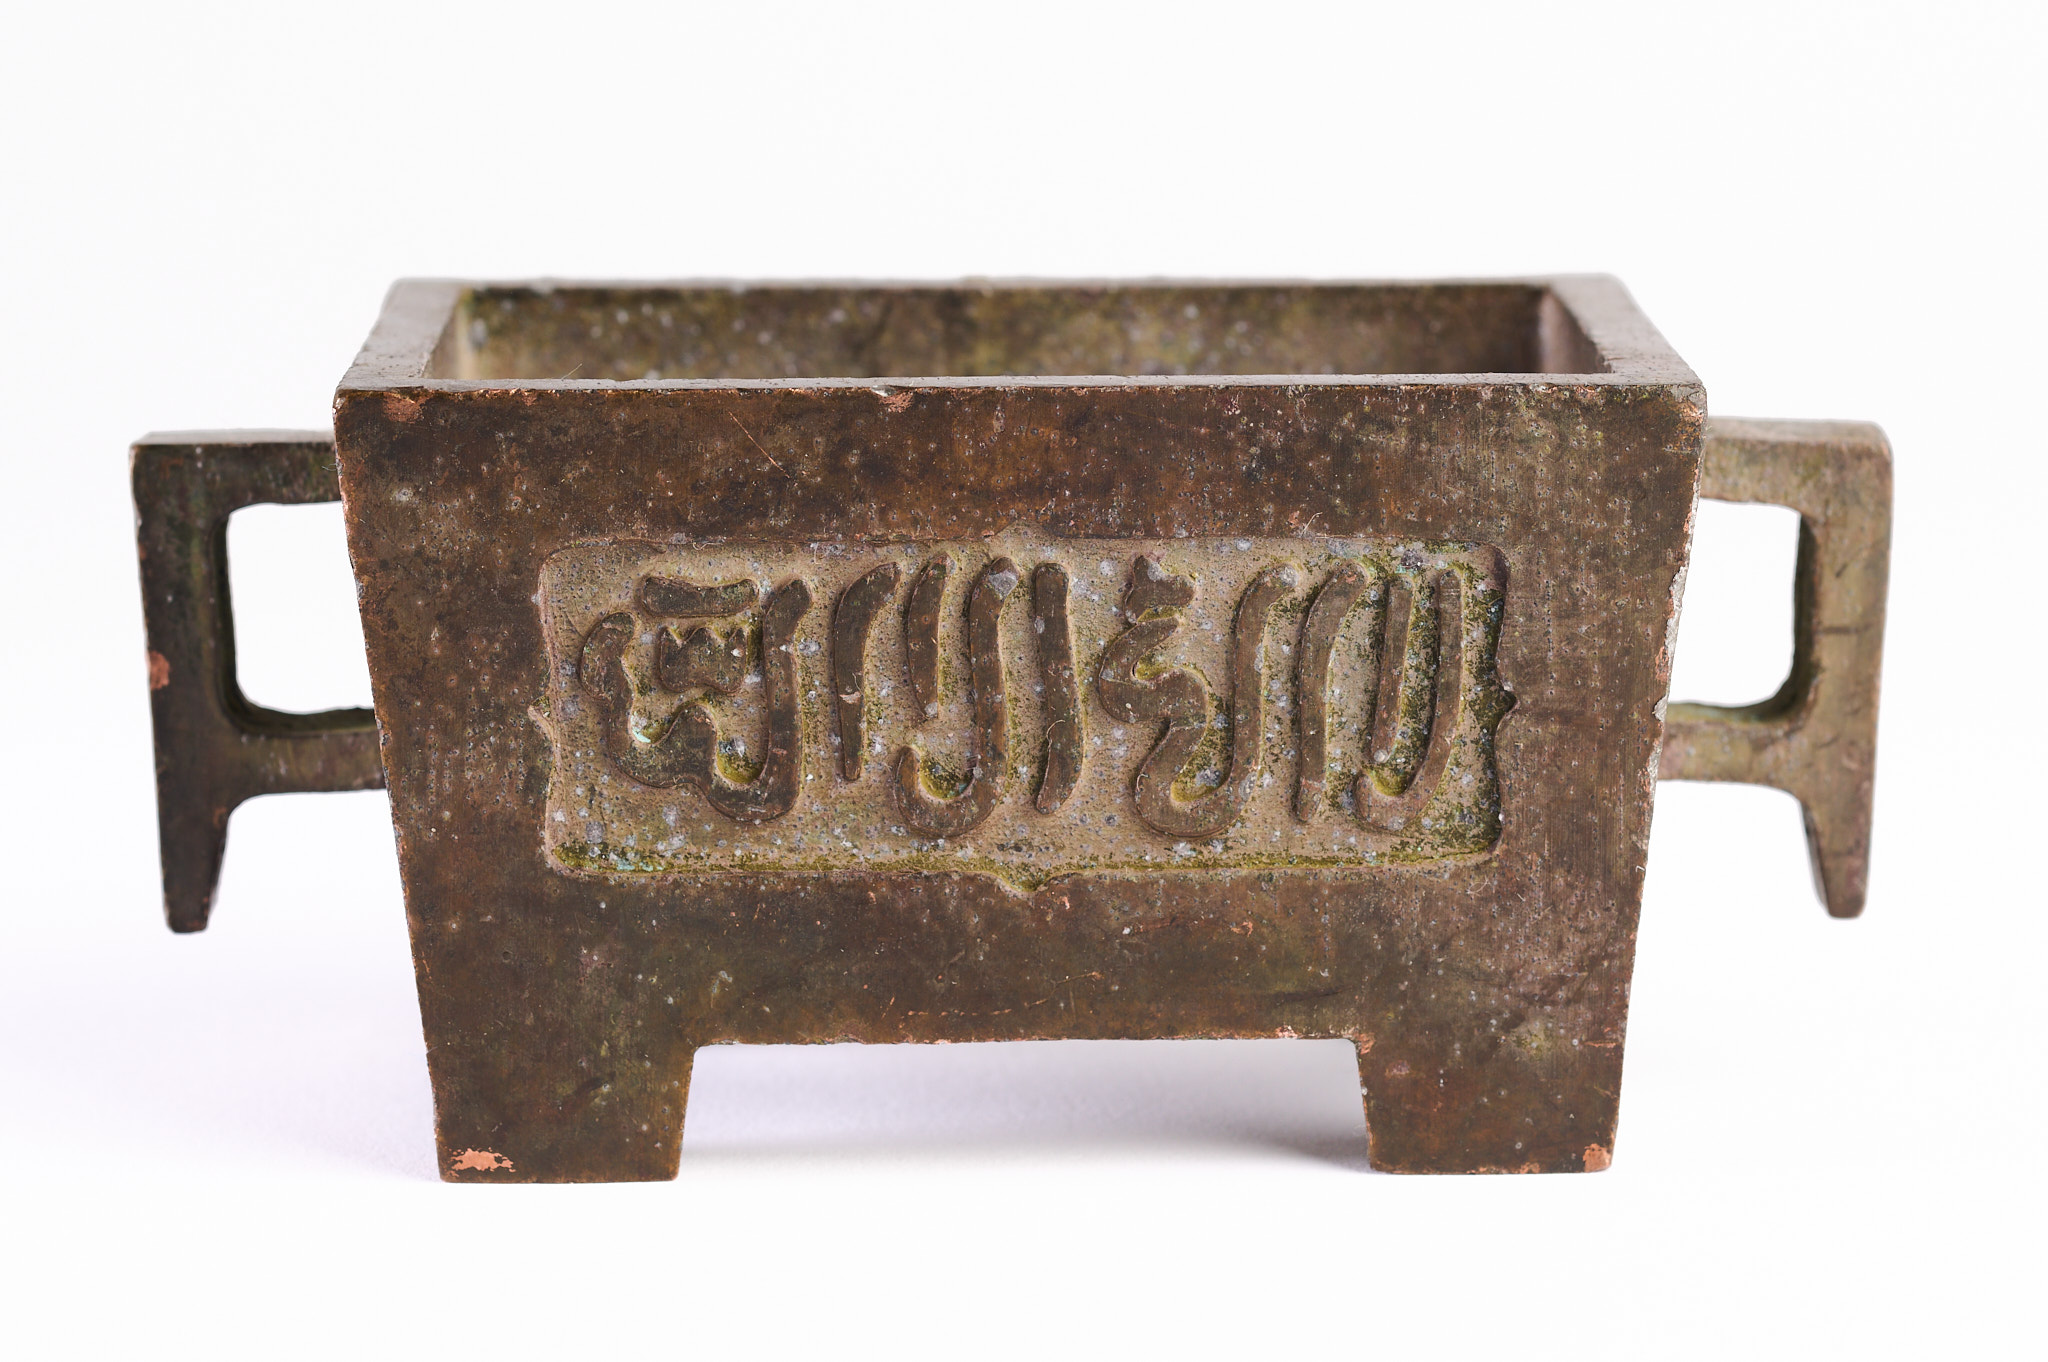 A SMALL MING-STYLE BRONZE CENSER FOR THE ISLAMIC MARKET, QING DYNASTY